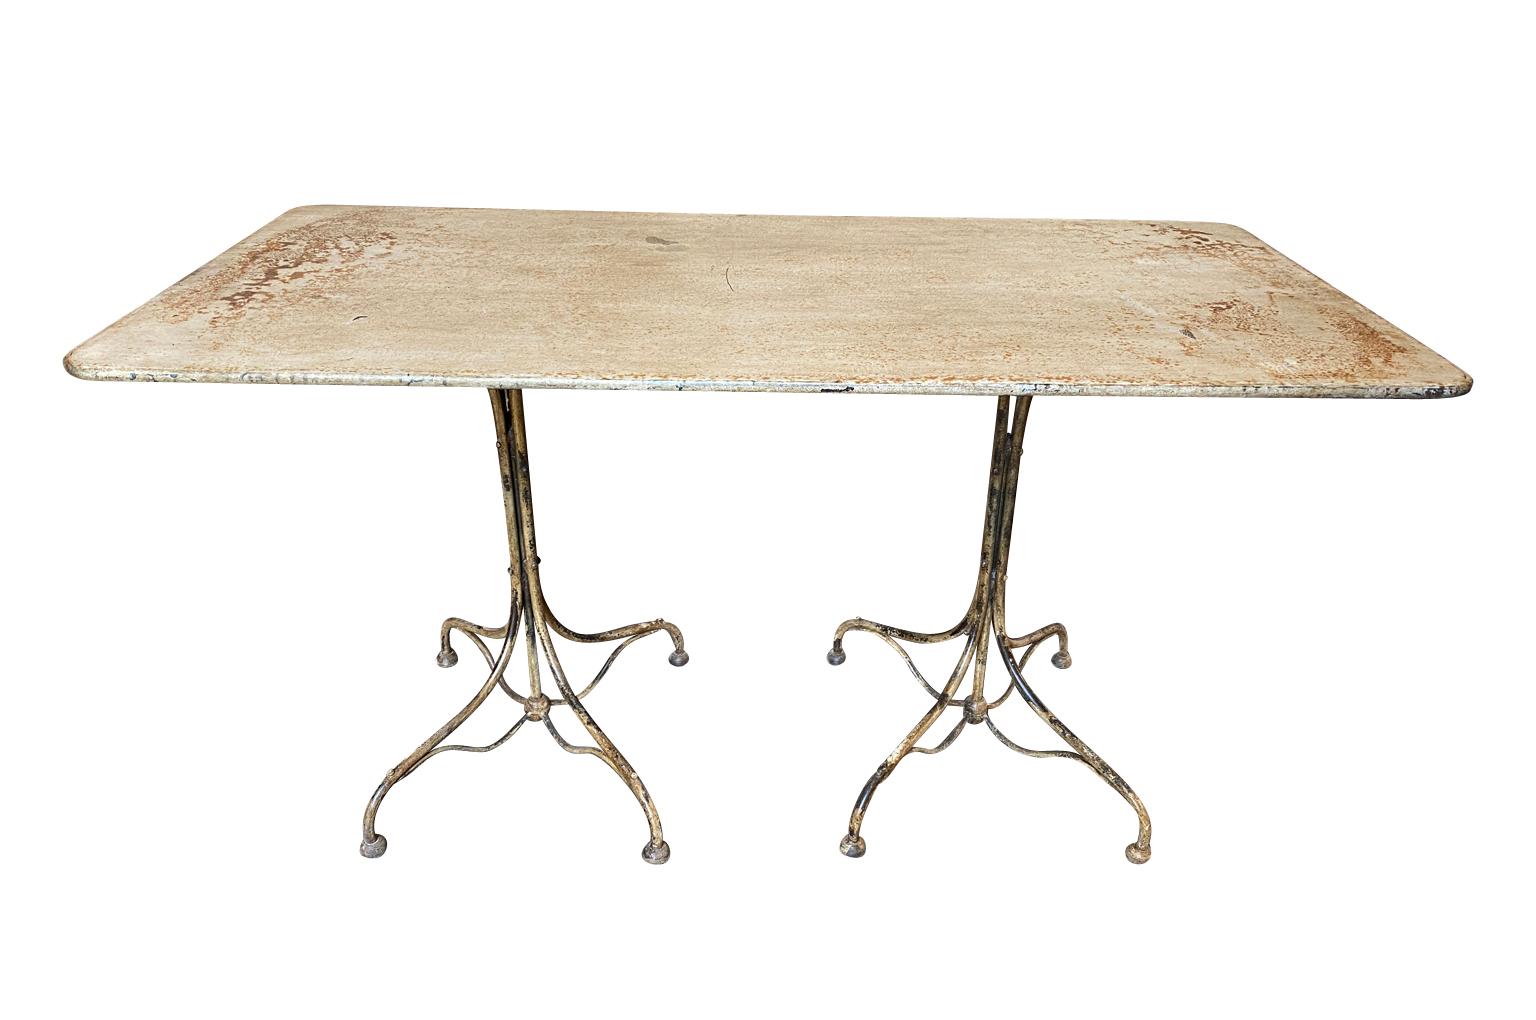 A very charming early 20th century Bistro table - Garden table from the Provence region of France. Soundly constructed from painted iron with a unique double form. Perfect for any solarium or garden.